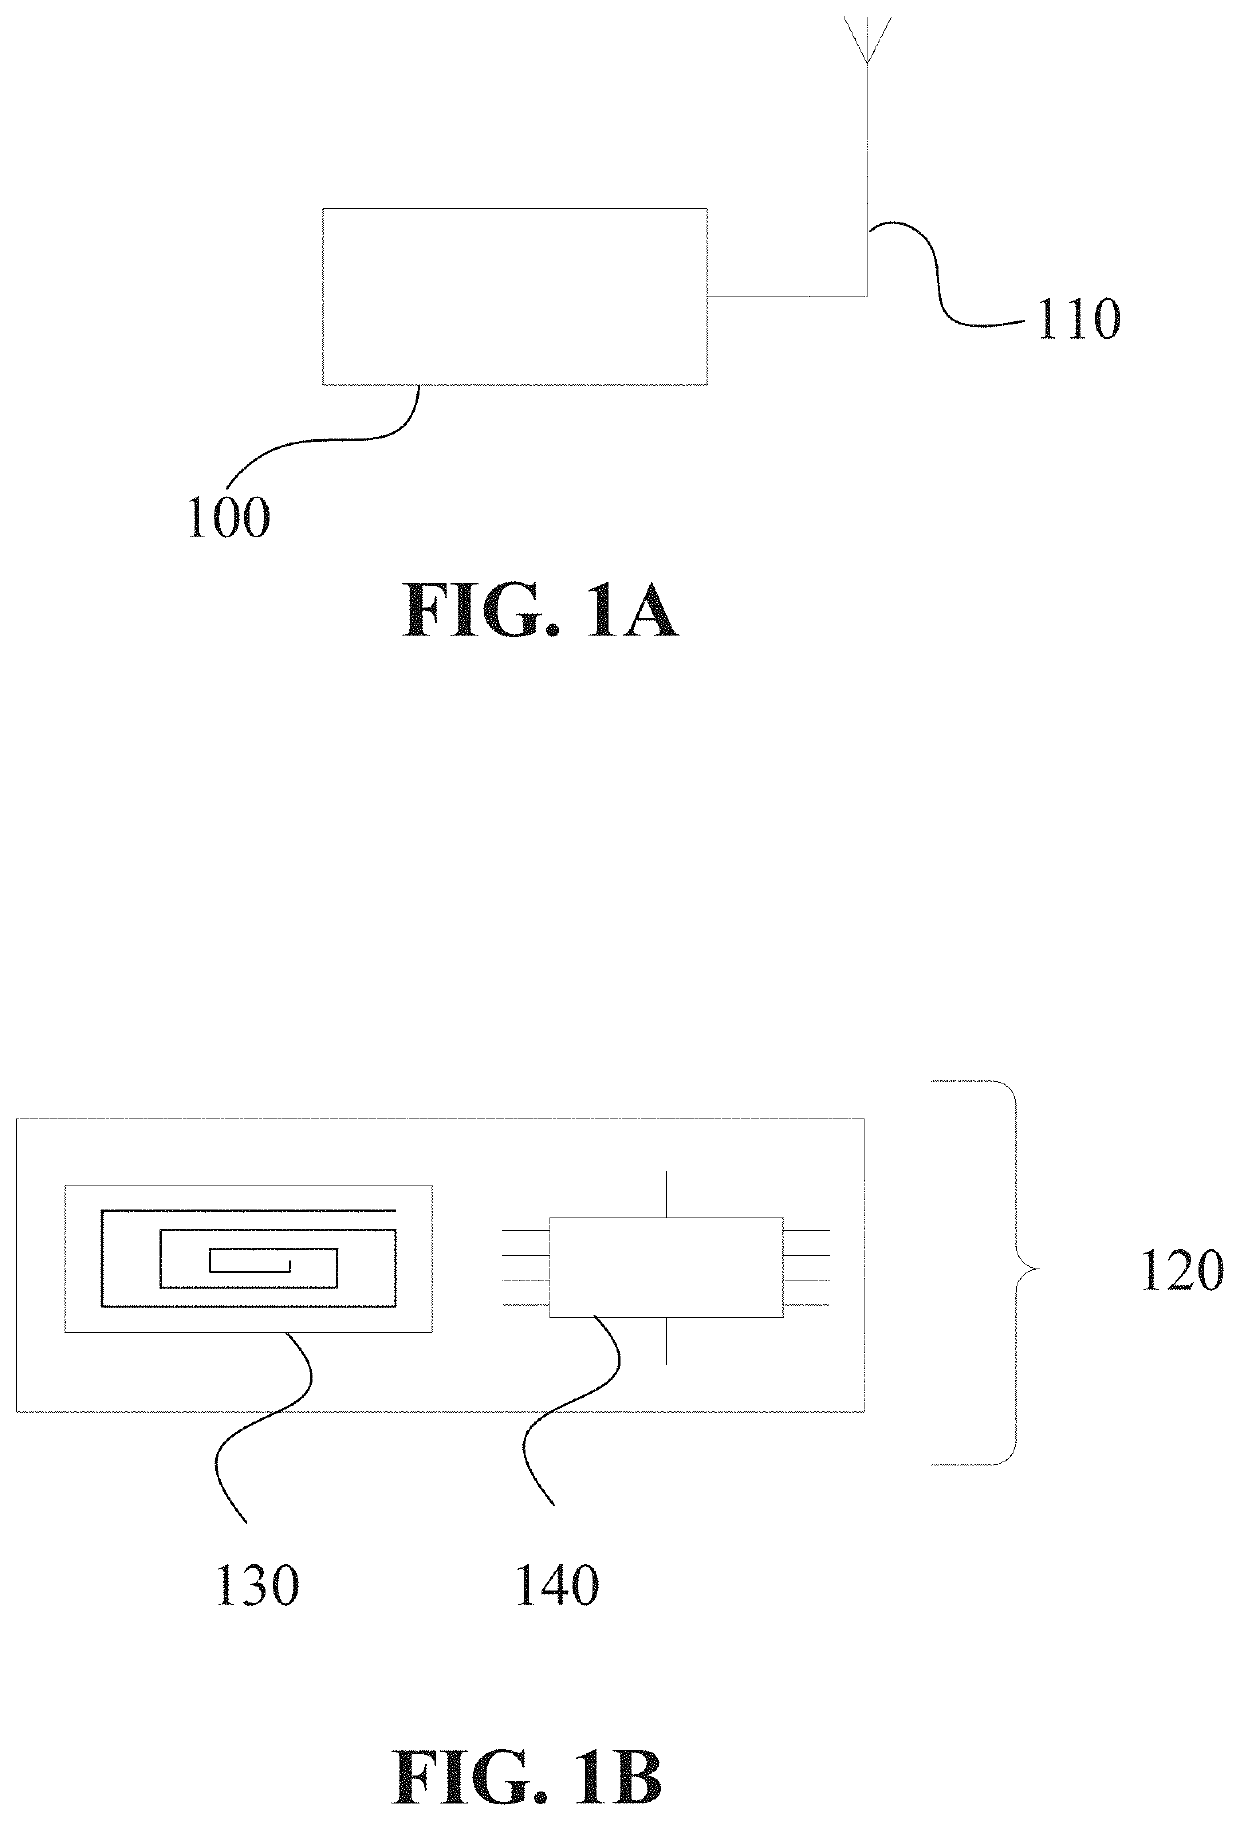 Material property monitoring and detection using wireless devices